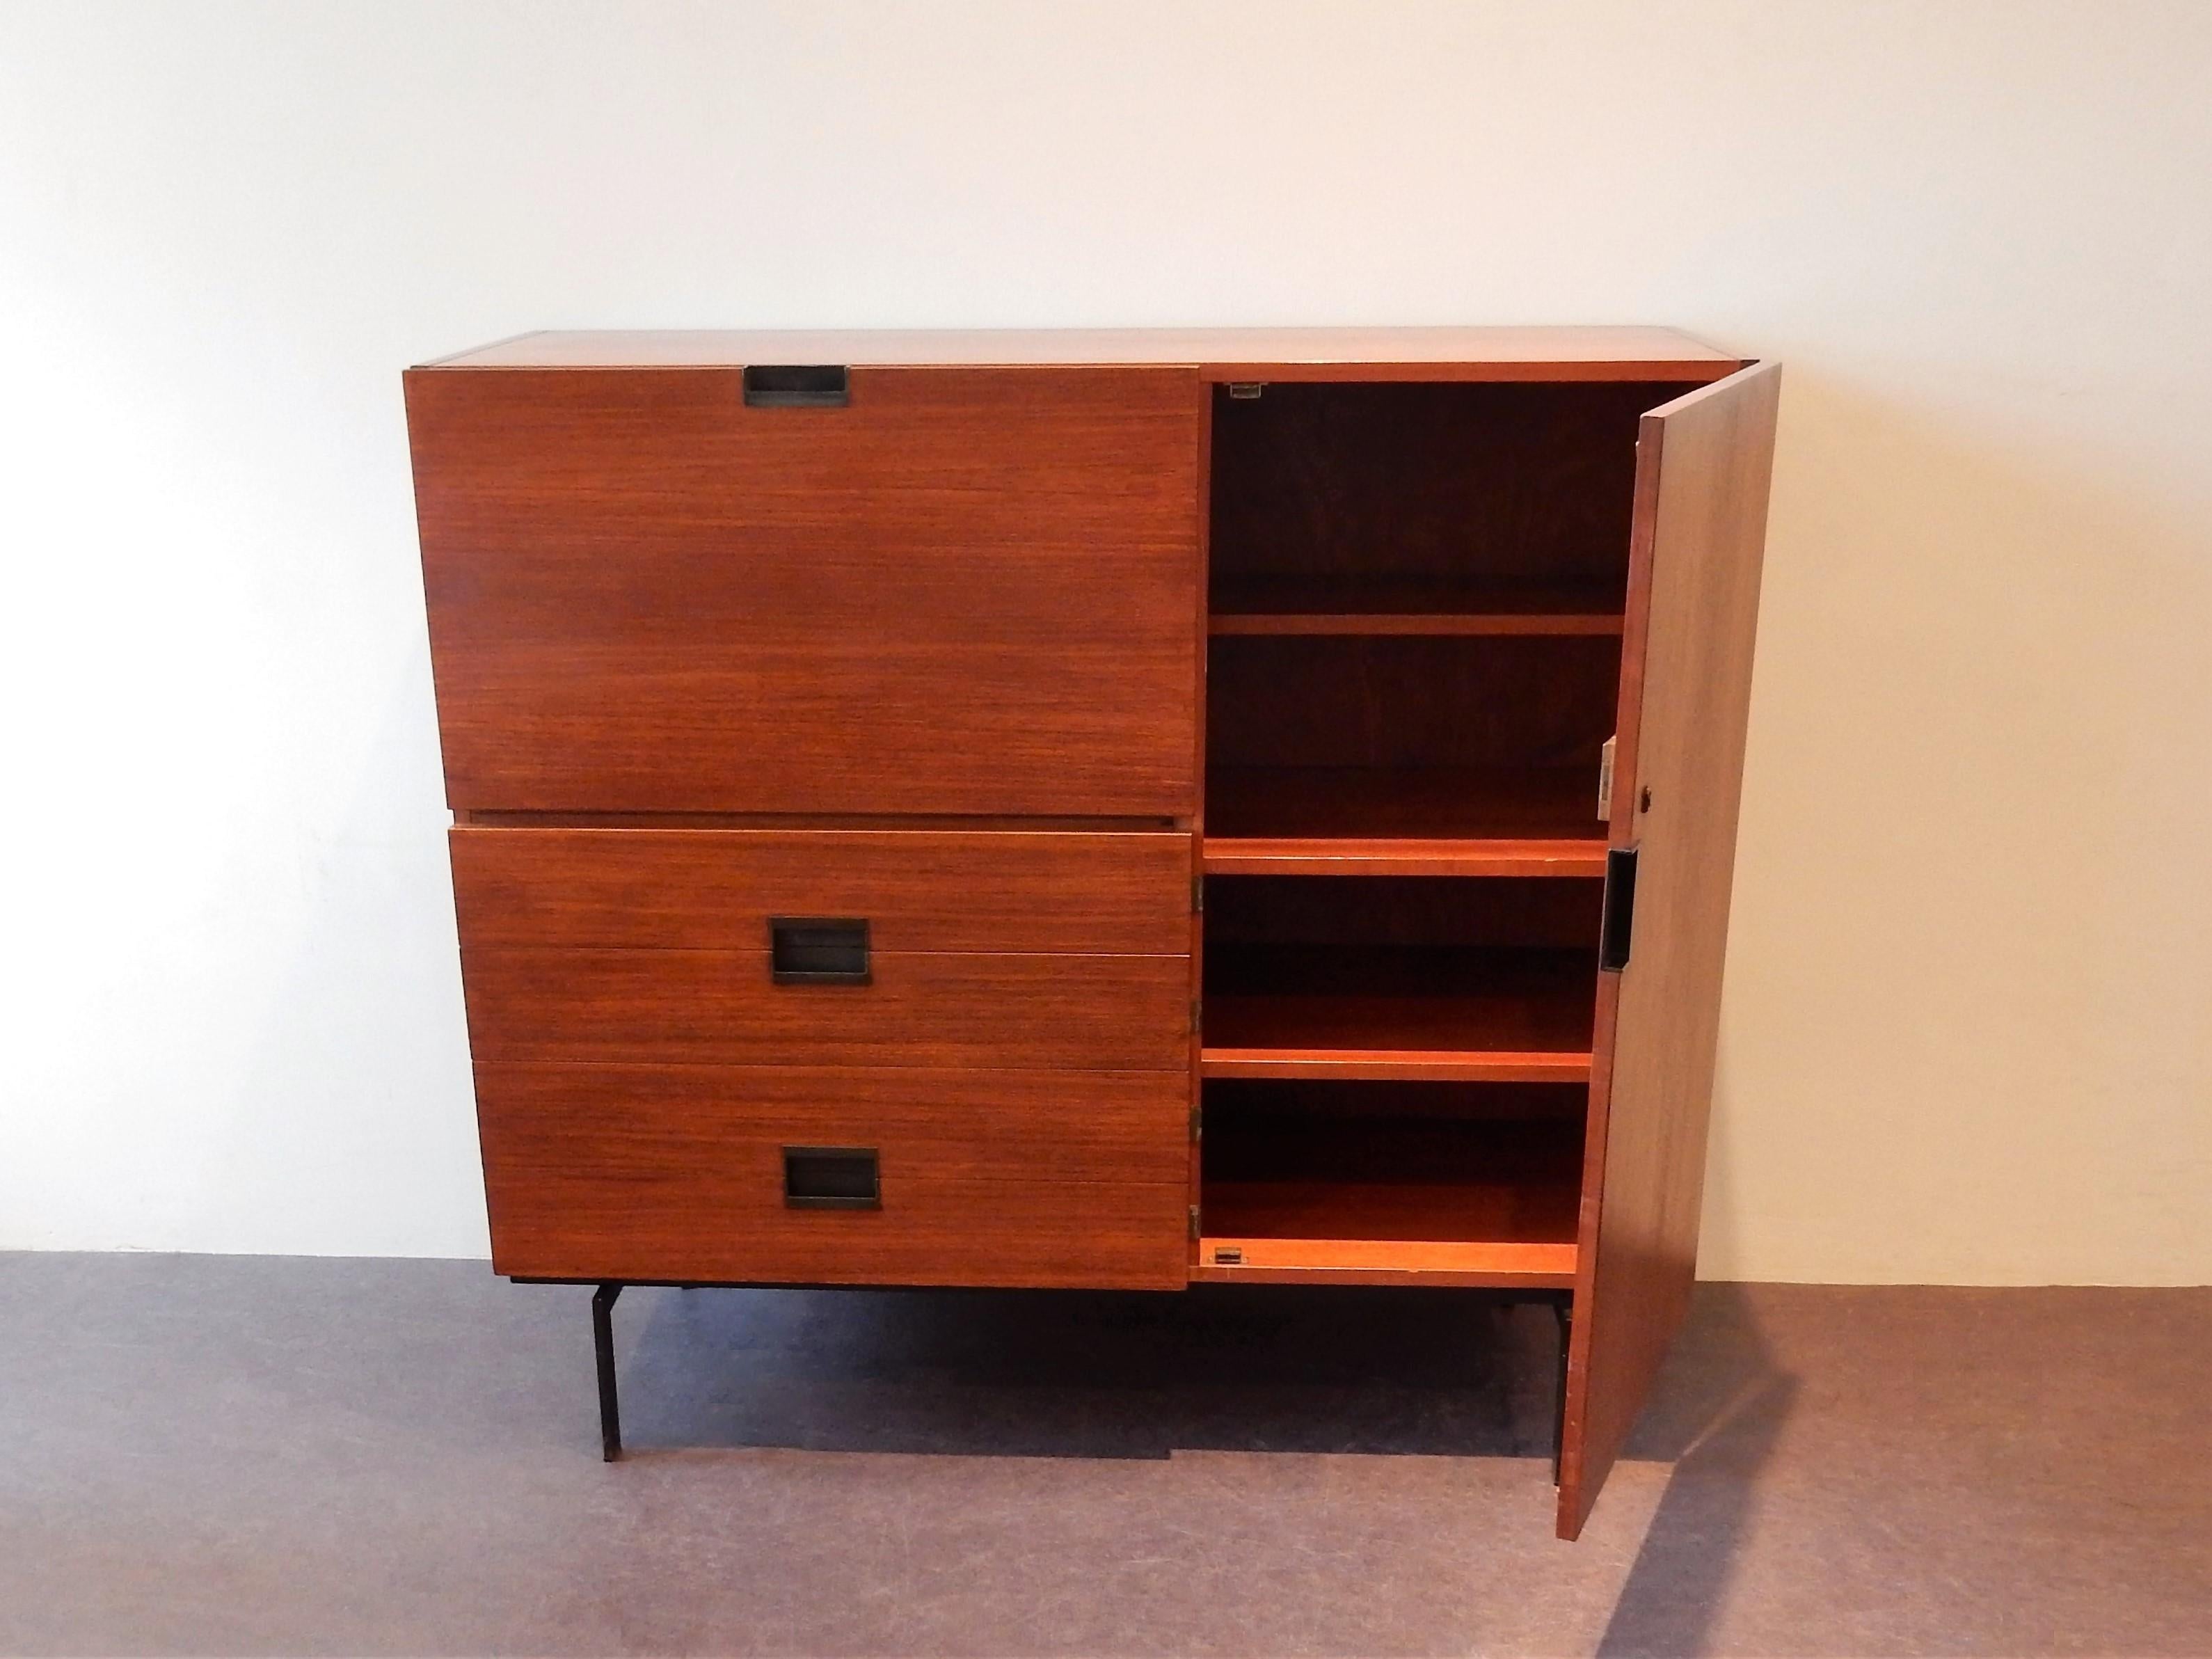 This very nice and highly collectable cabinet, from the Japanese series, was designed by Cees Braakman for Pastoe in 1958. It was originally designed as a liquor/bar cabinet. Now mostly used as storage cabinet/desk. The cabinet is made from teak